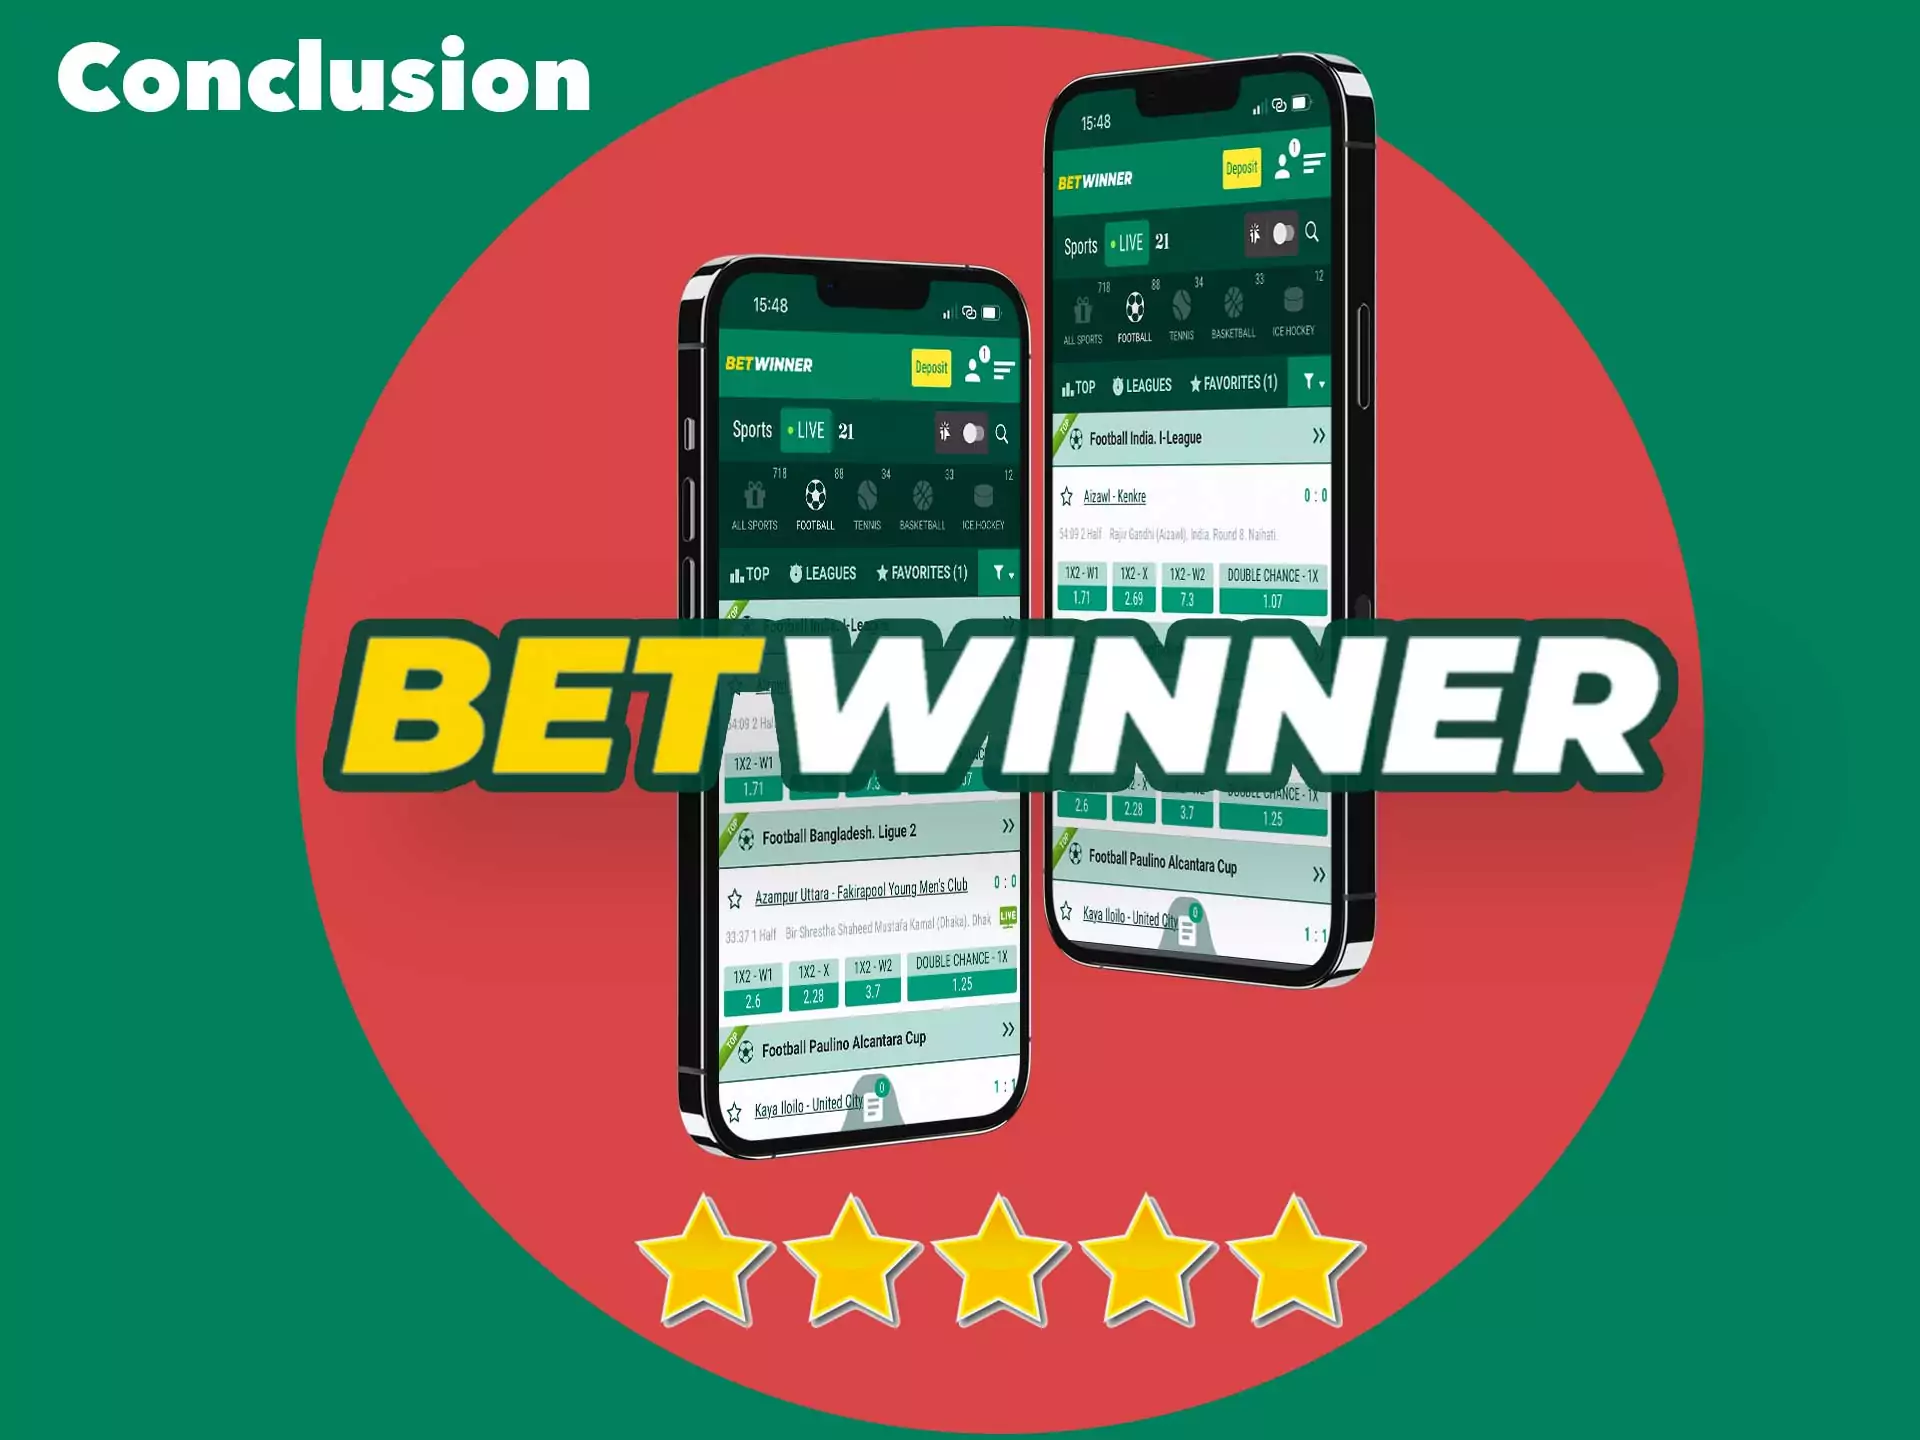 Betwinner is an application which is certainly worth using, it has a high quality of services and great design features.esign features.